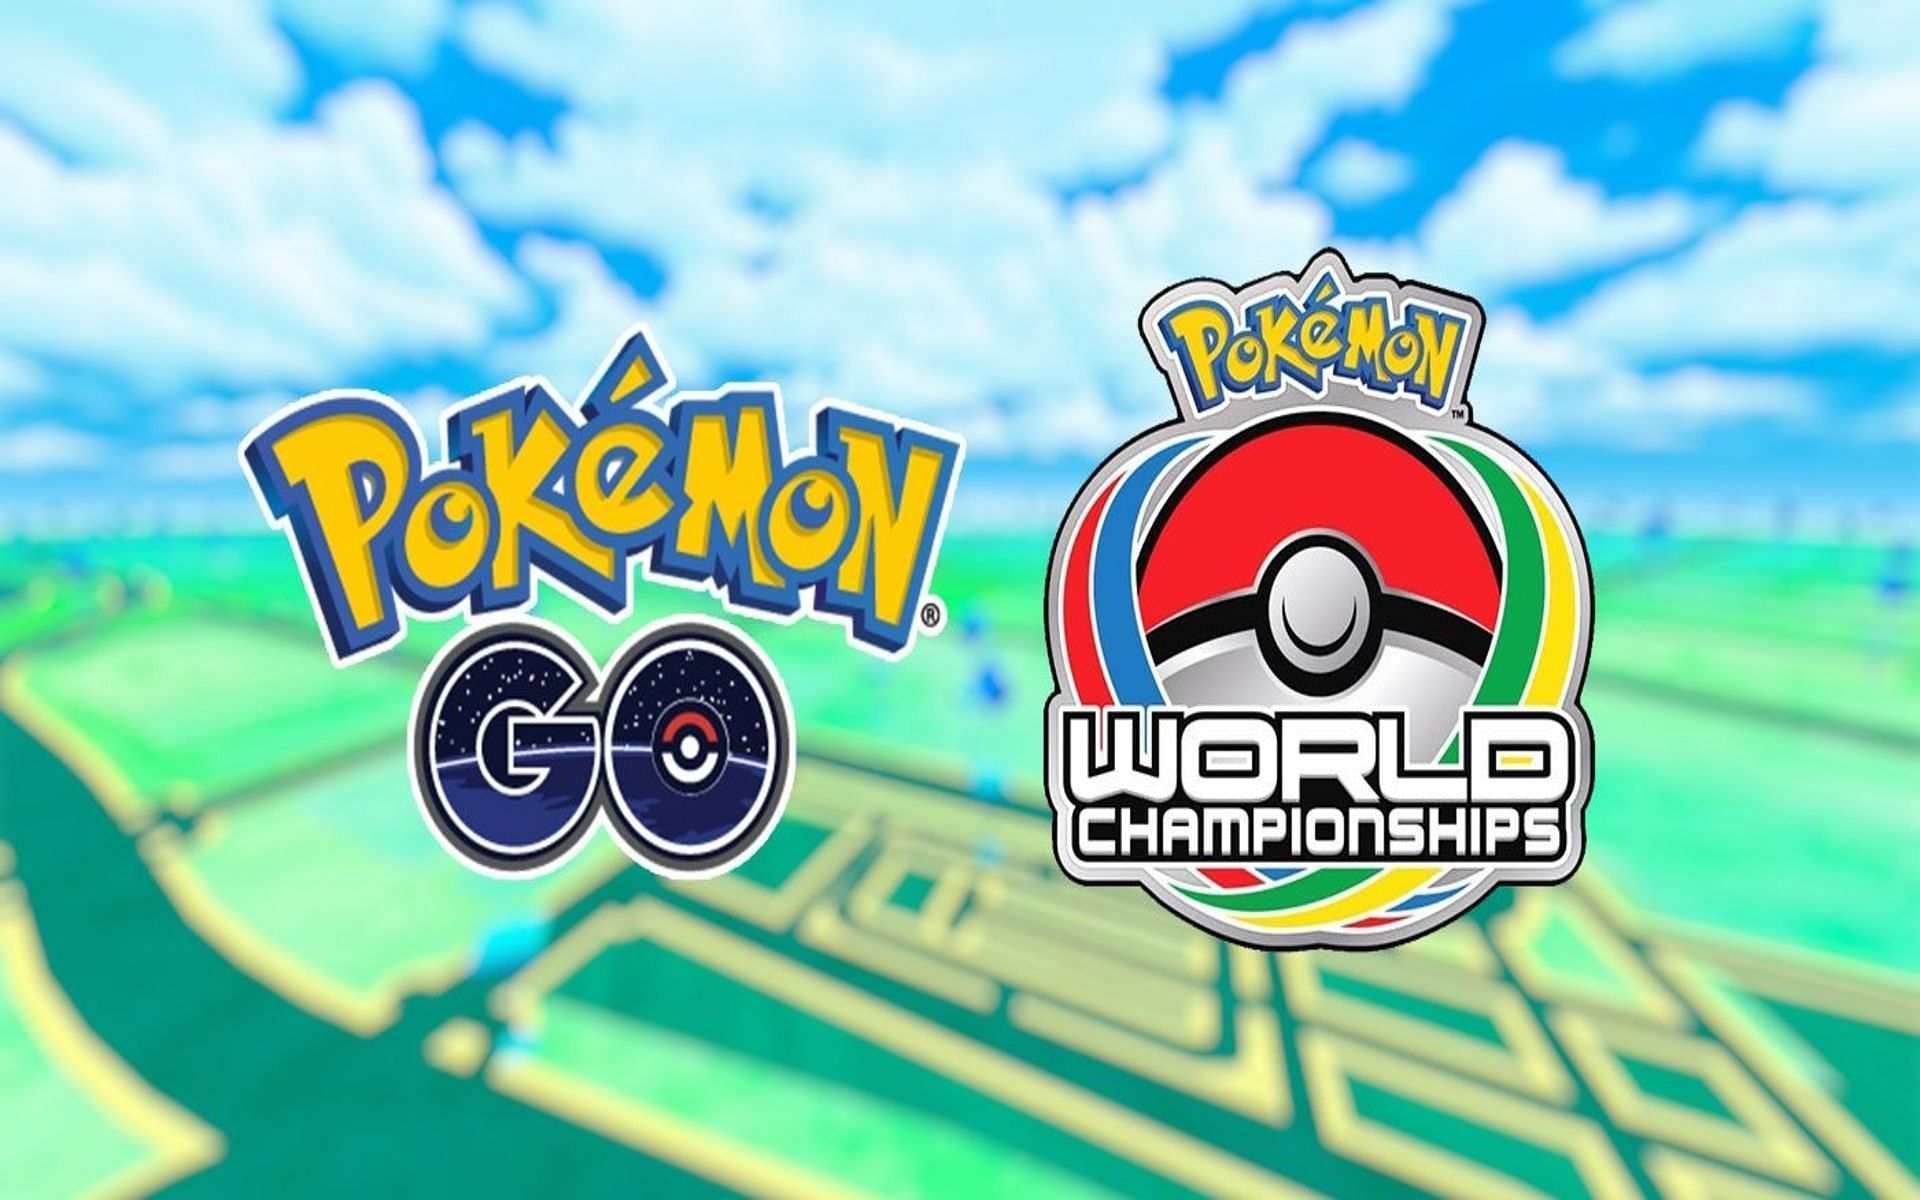 2022 will be the first year Pokemon GO appears at the Pokemon World Championships (Image via Niantic)